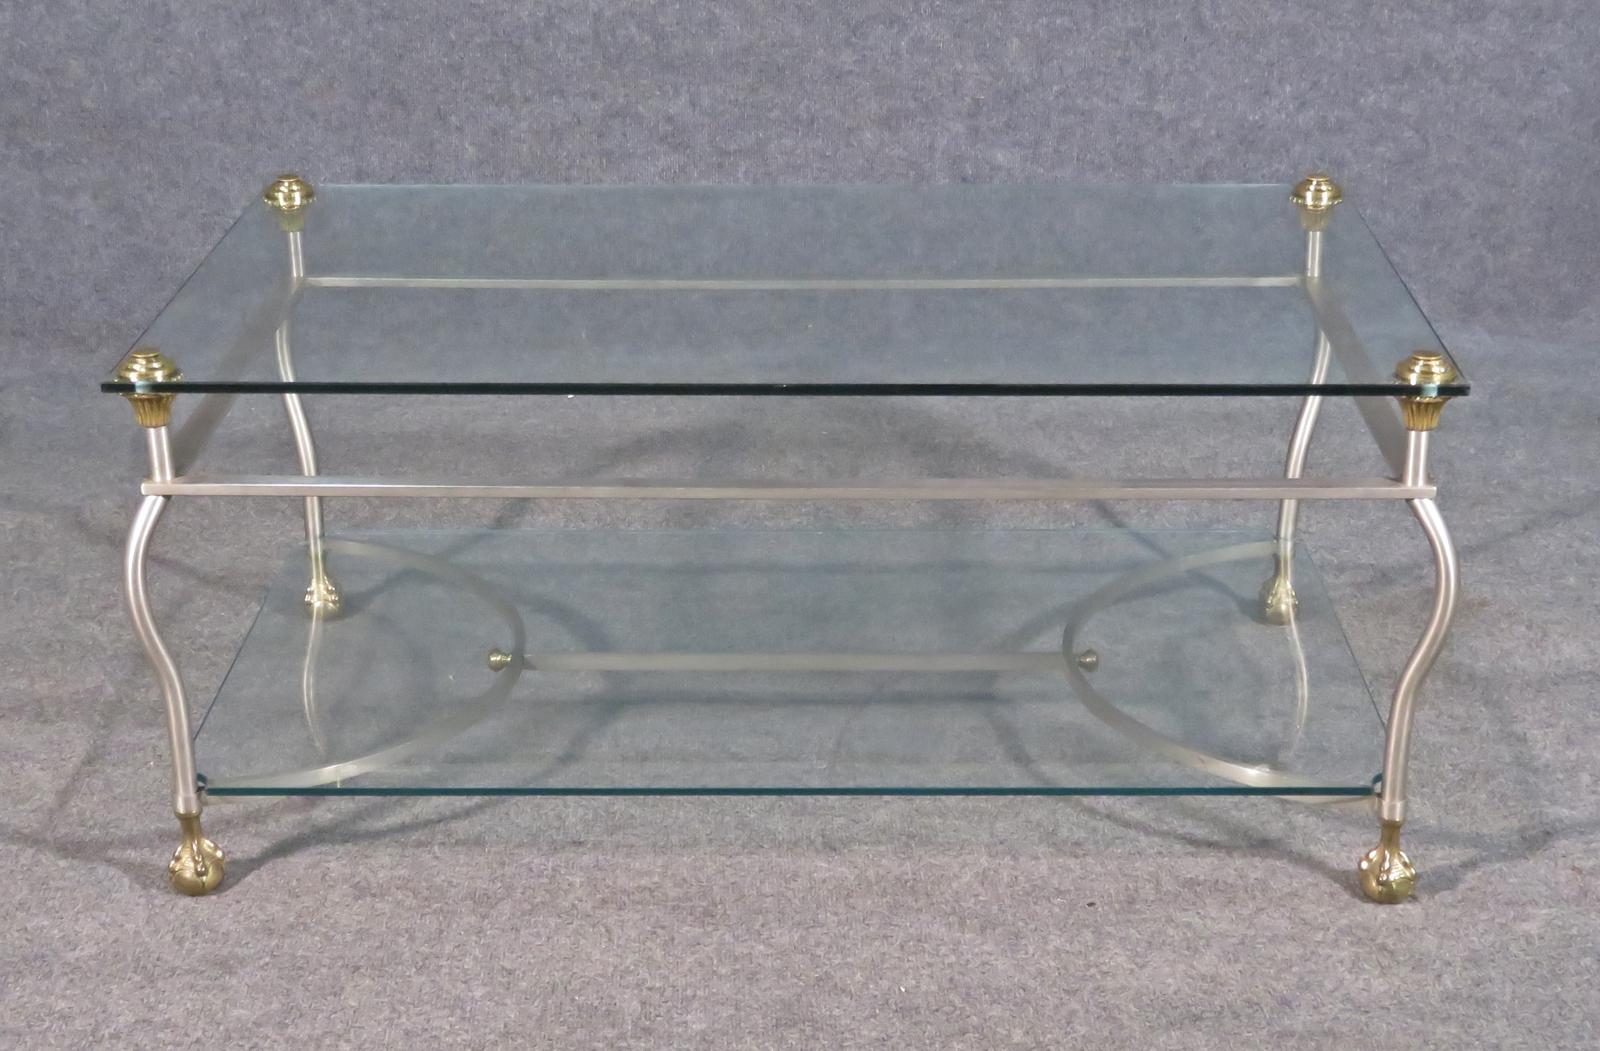 This is a gorgeous Maison Jansen coffee table with steel, glass and brass trim. The table is in good original condition and ready to take home. Chrome frame. Brass accent. Ball and claw feet. 2 tier. Glass shelves. Measures: 18 3/4